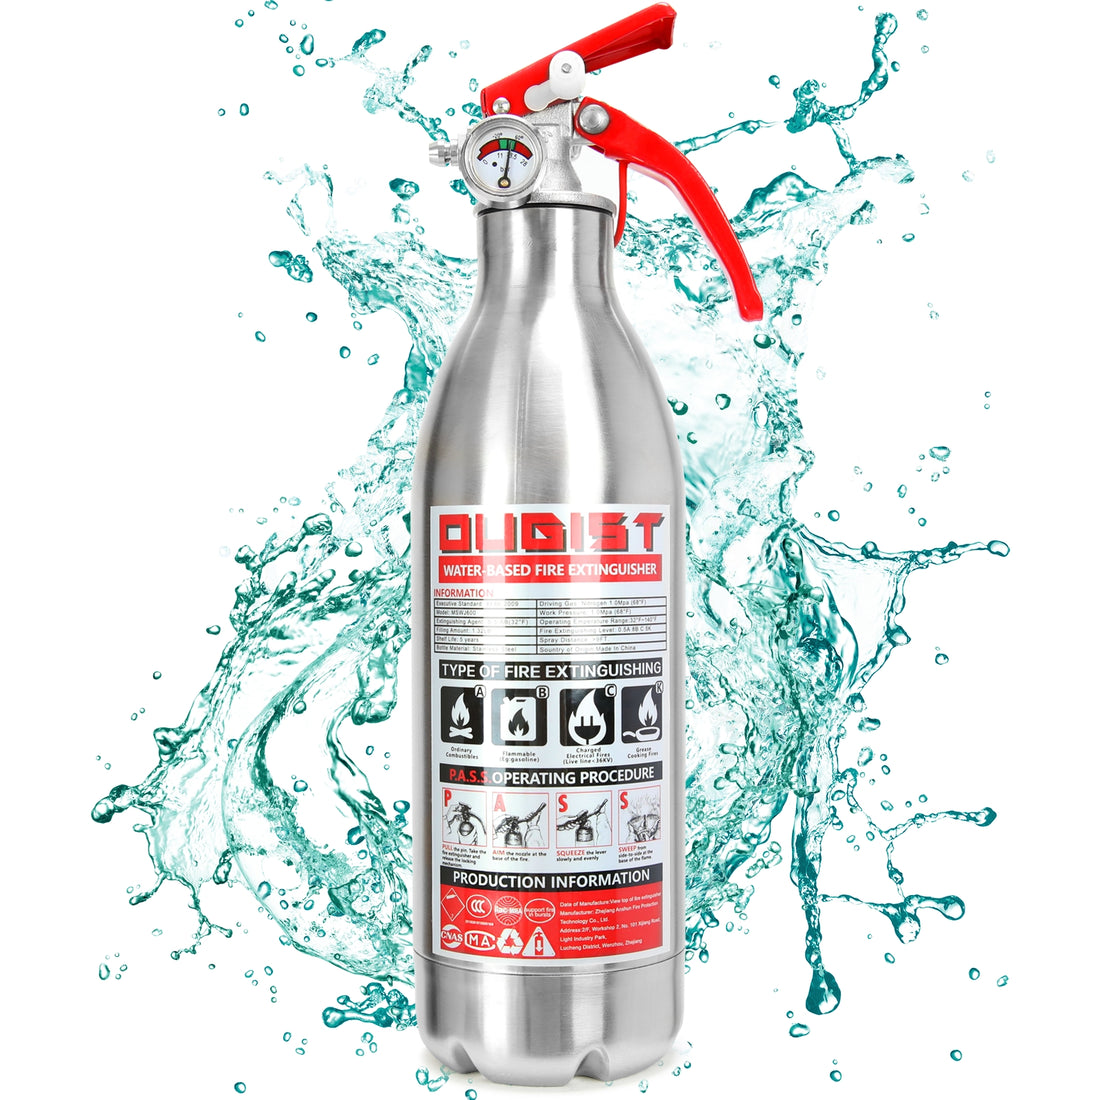 What is the difference between water and CO2 fire extinguisher?